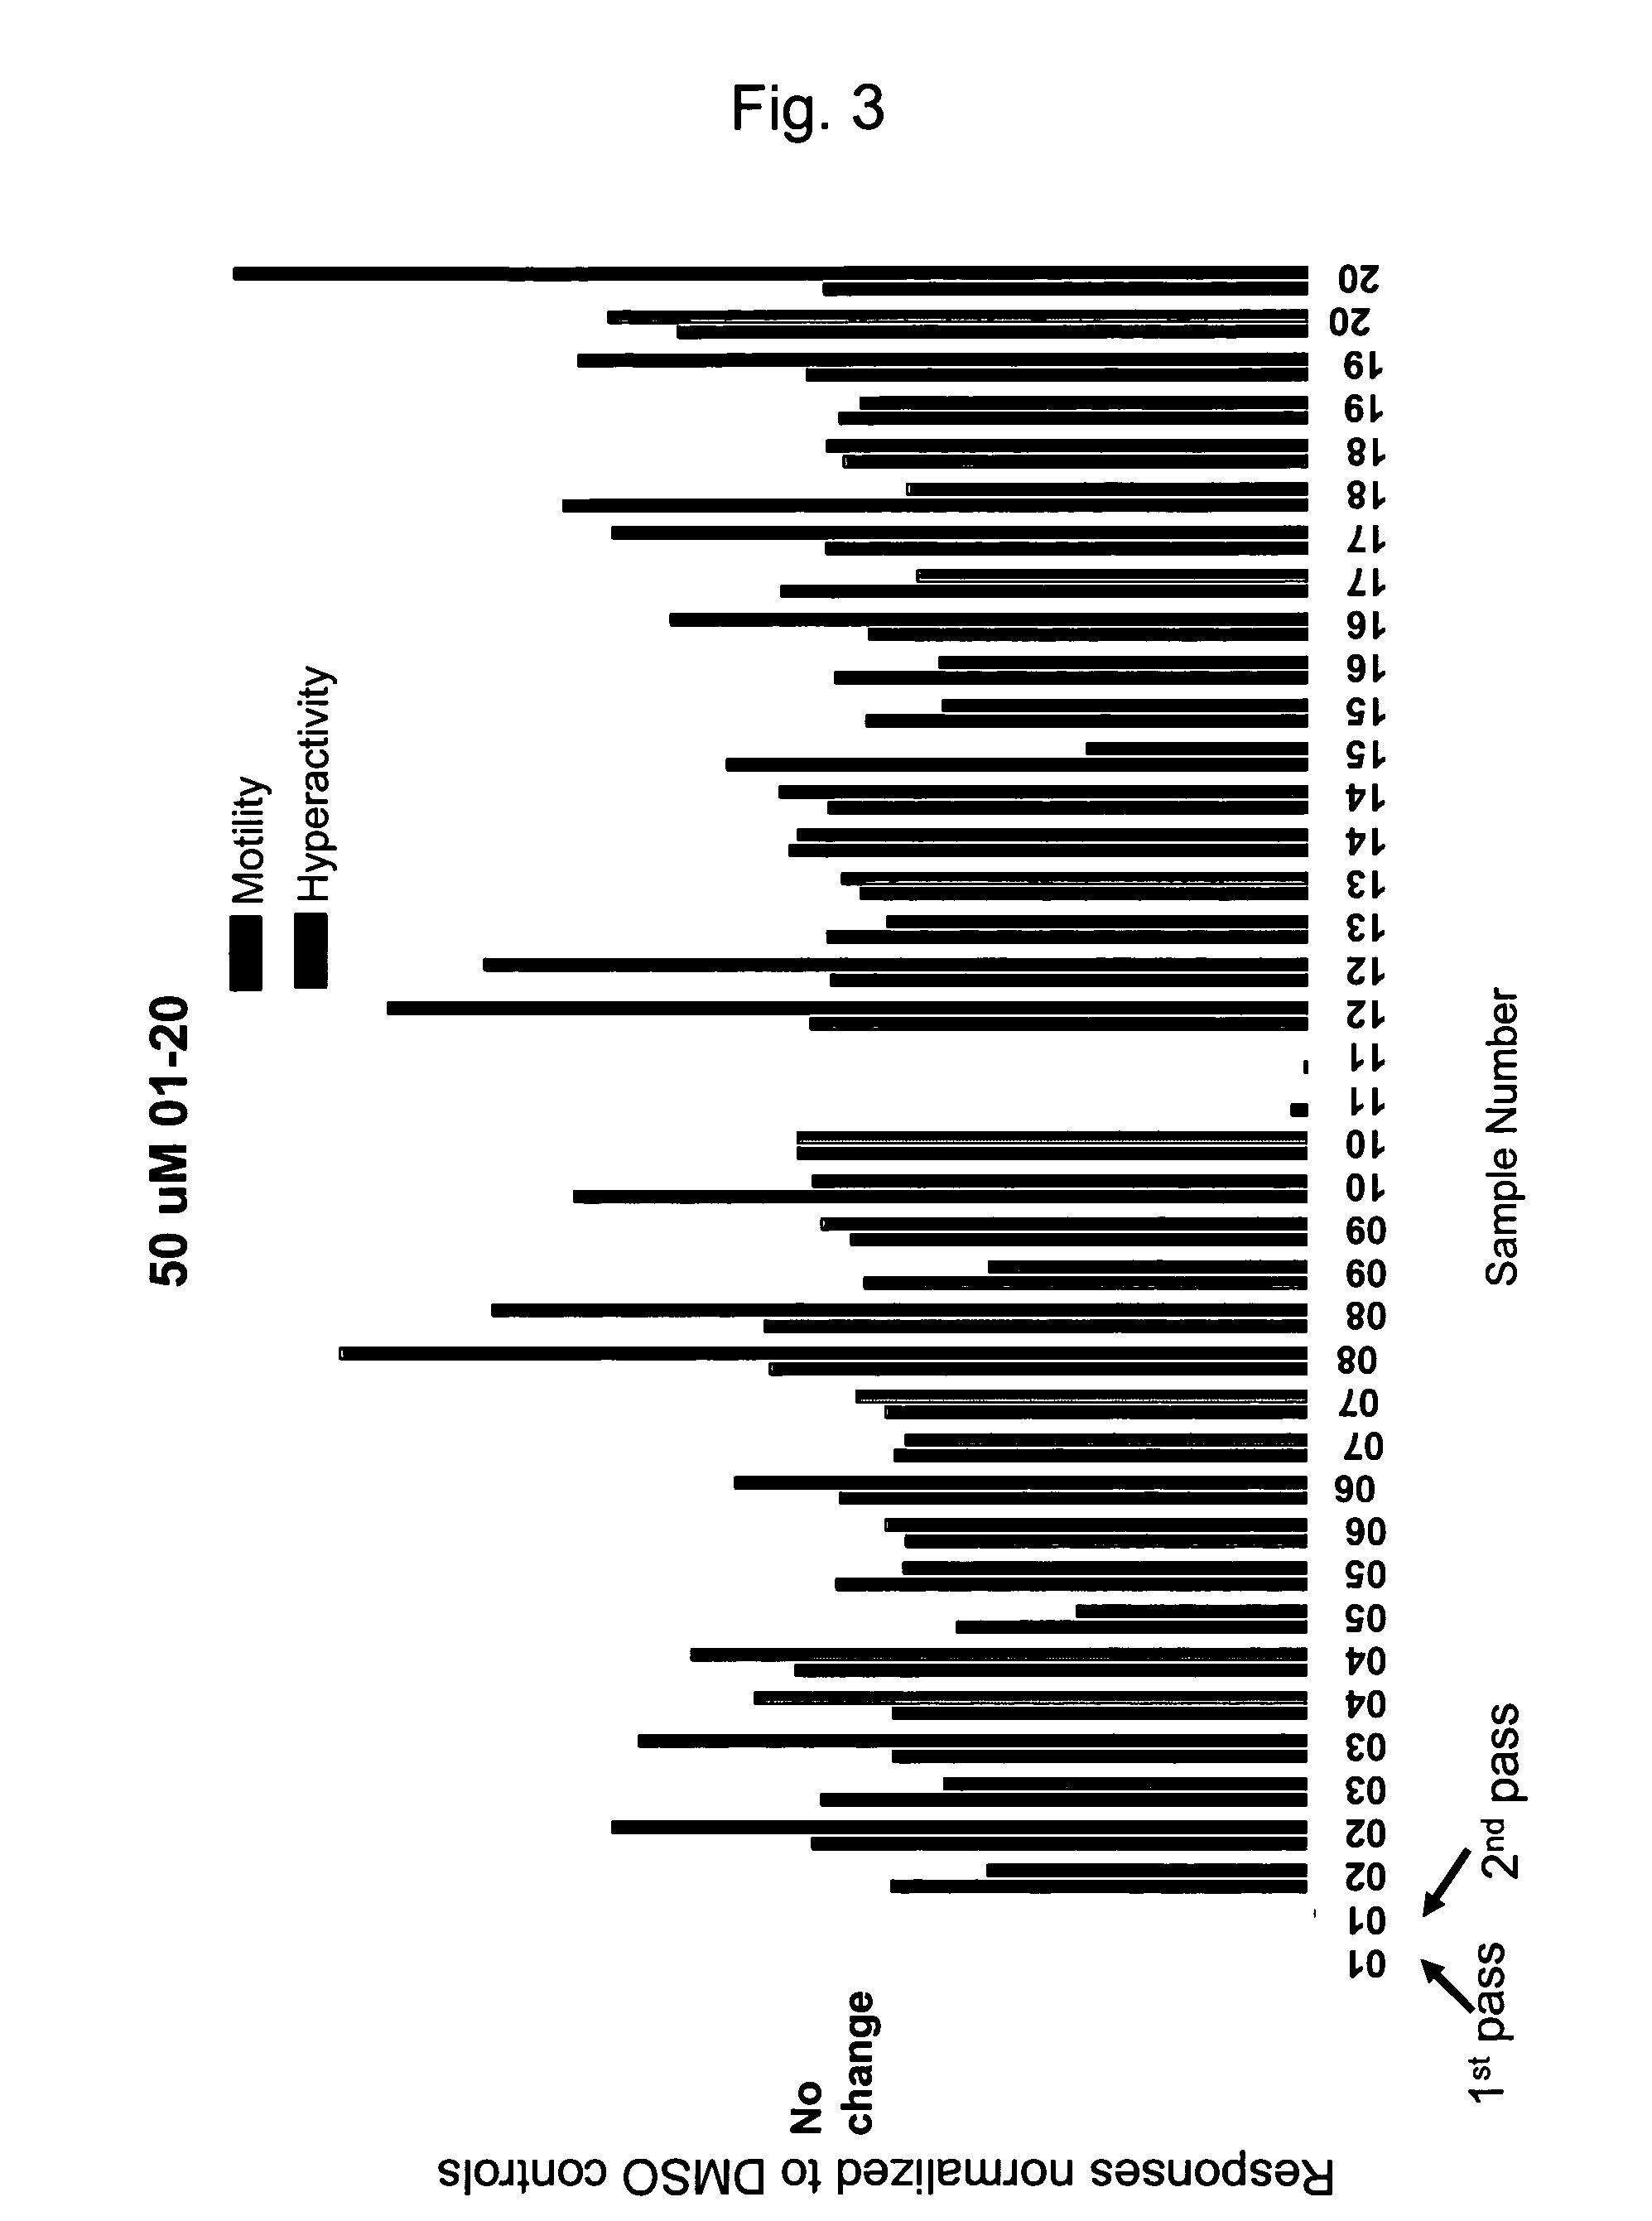 Modulators of sperm hypermotility and uses thereof